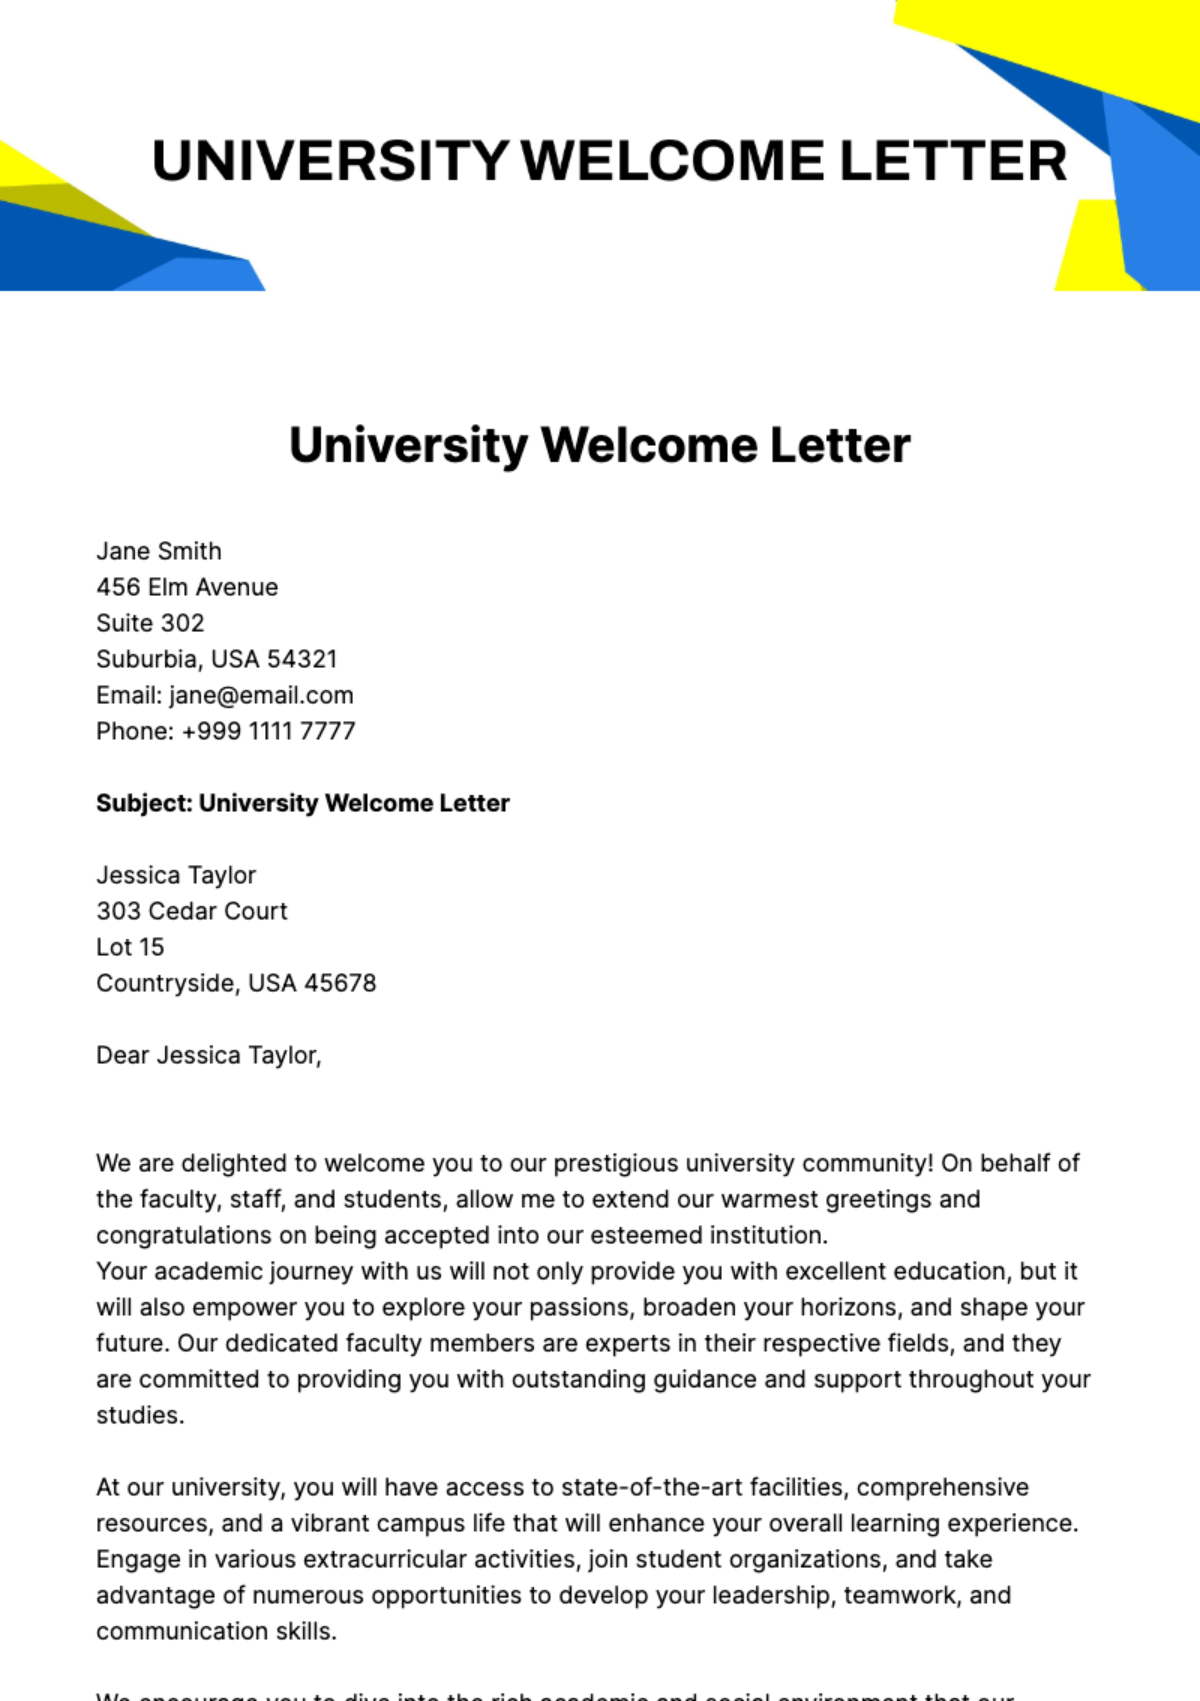 Free University Welcome Letter Template